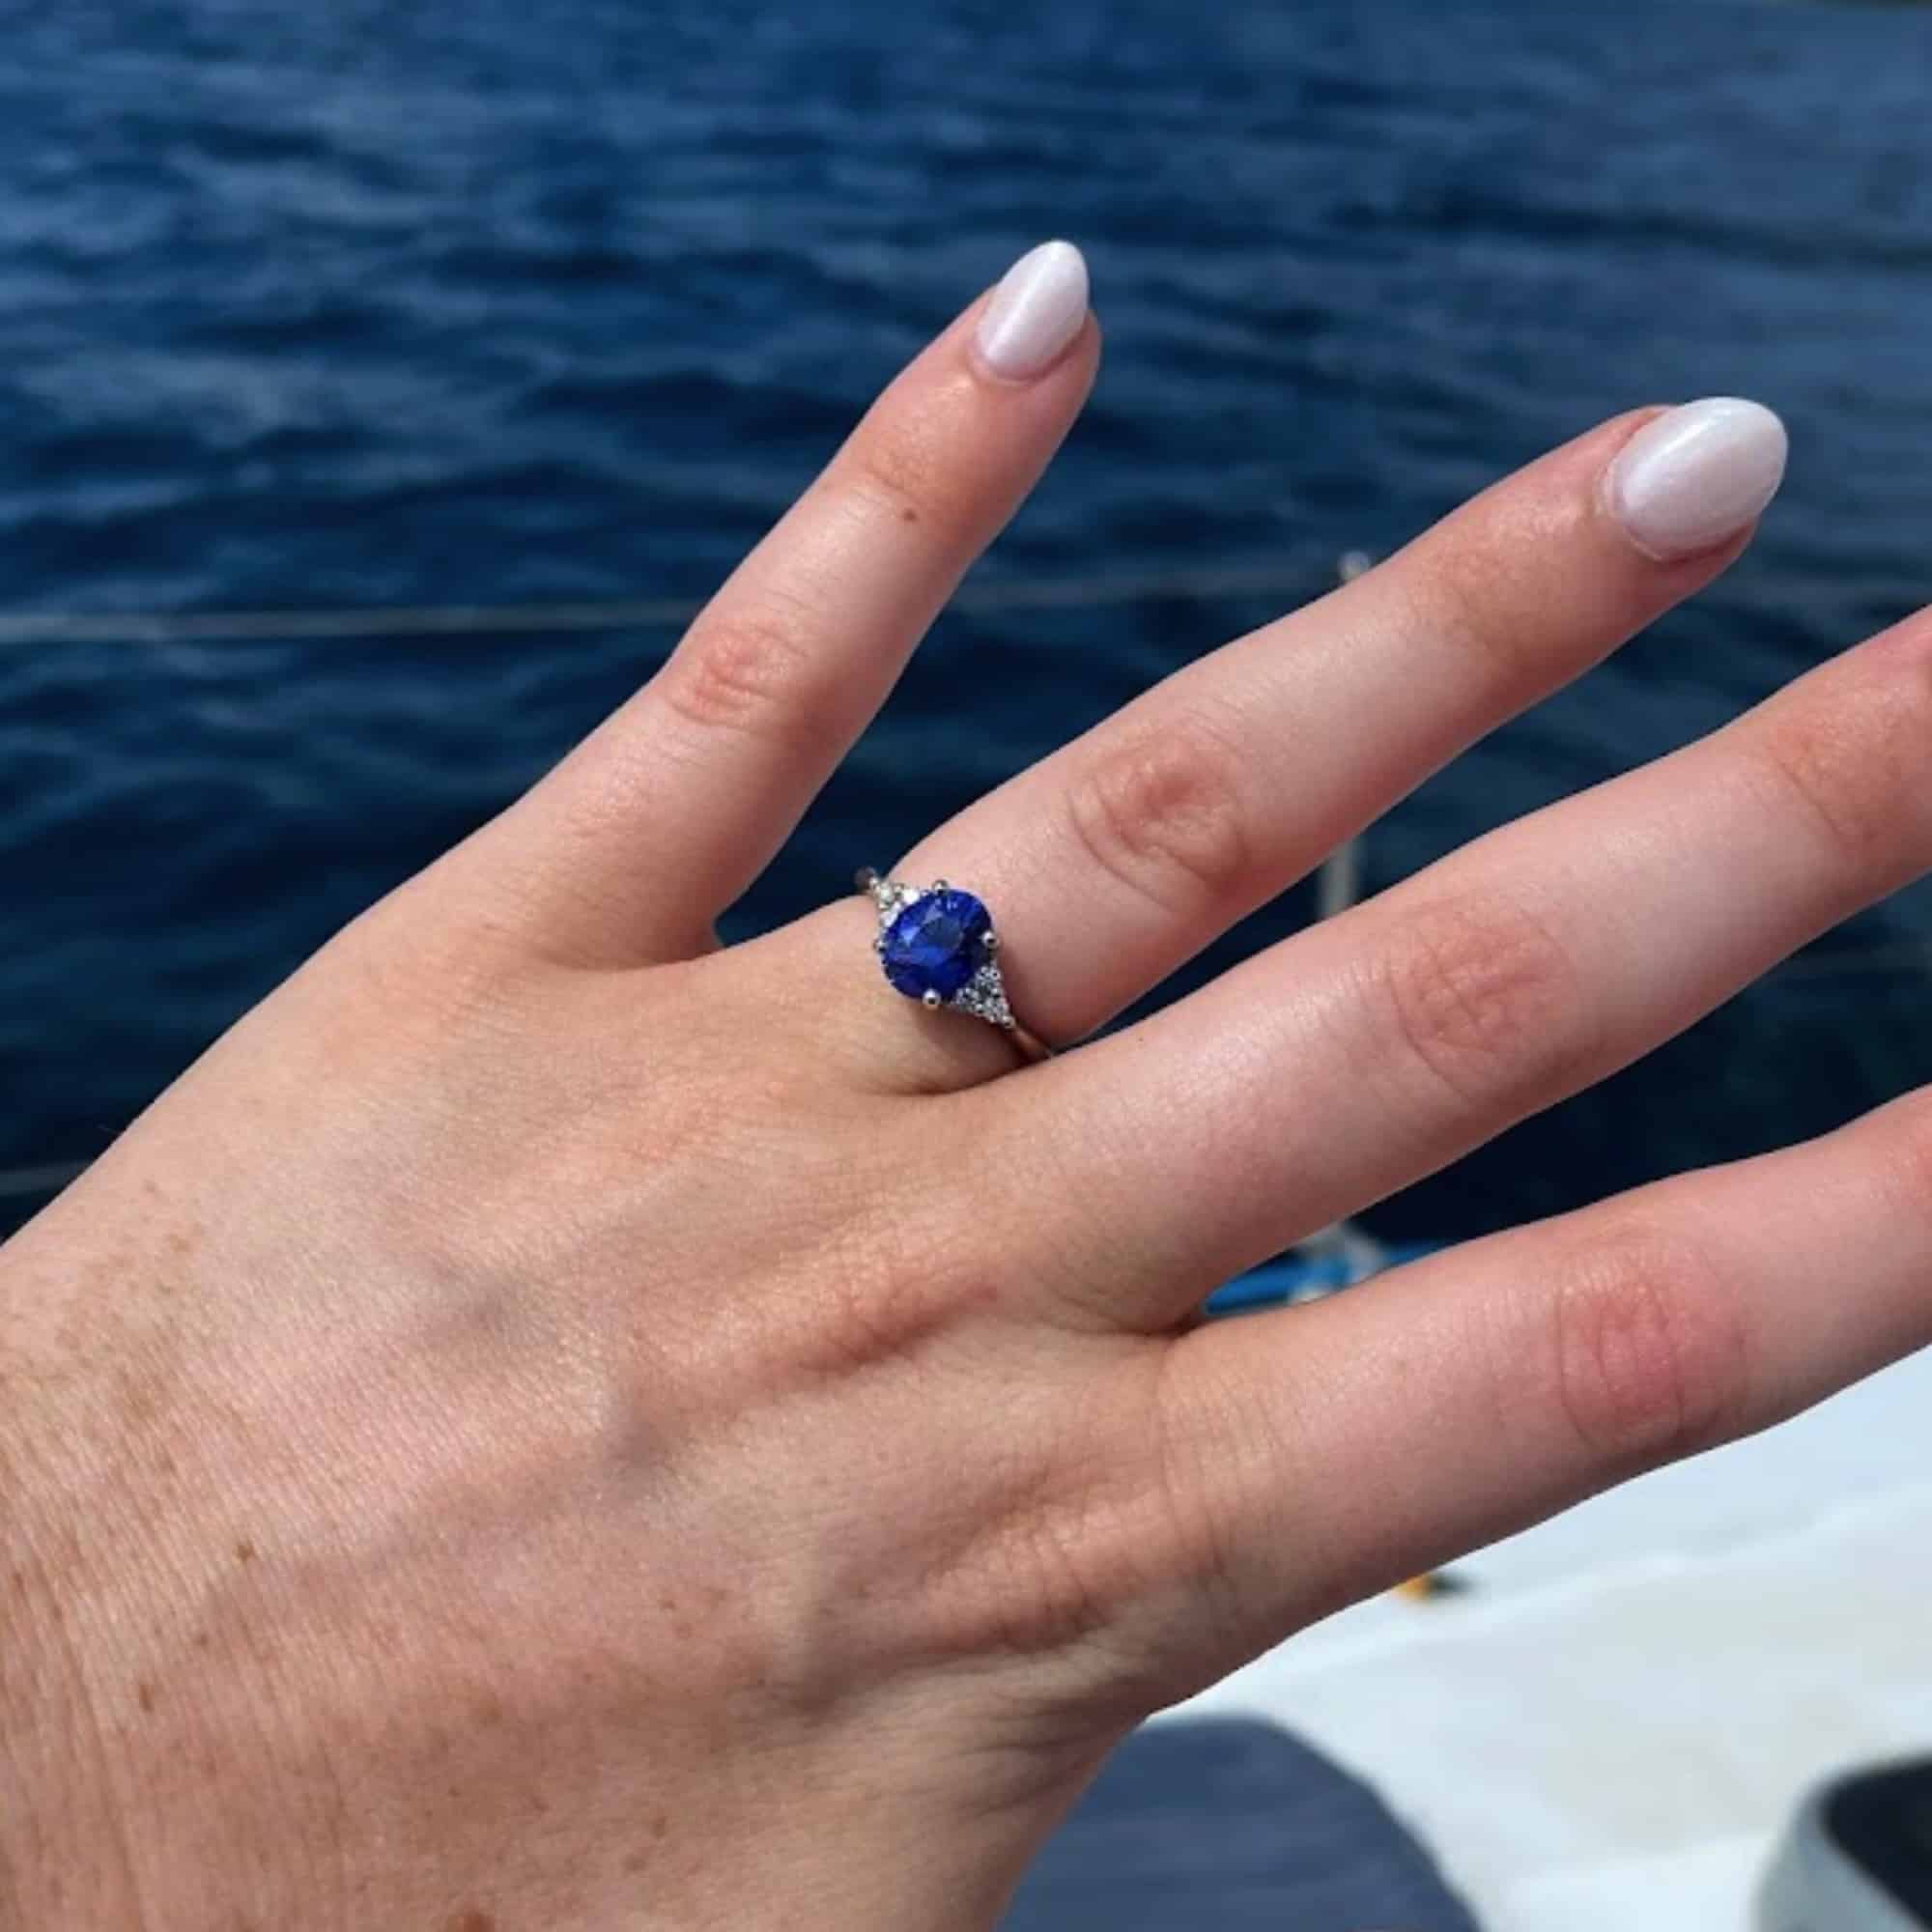 An engagement photo from a customer review featuring a "Kacie" ring with a royal blue oval sapphire, on a well-manicured hand against ocean waves